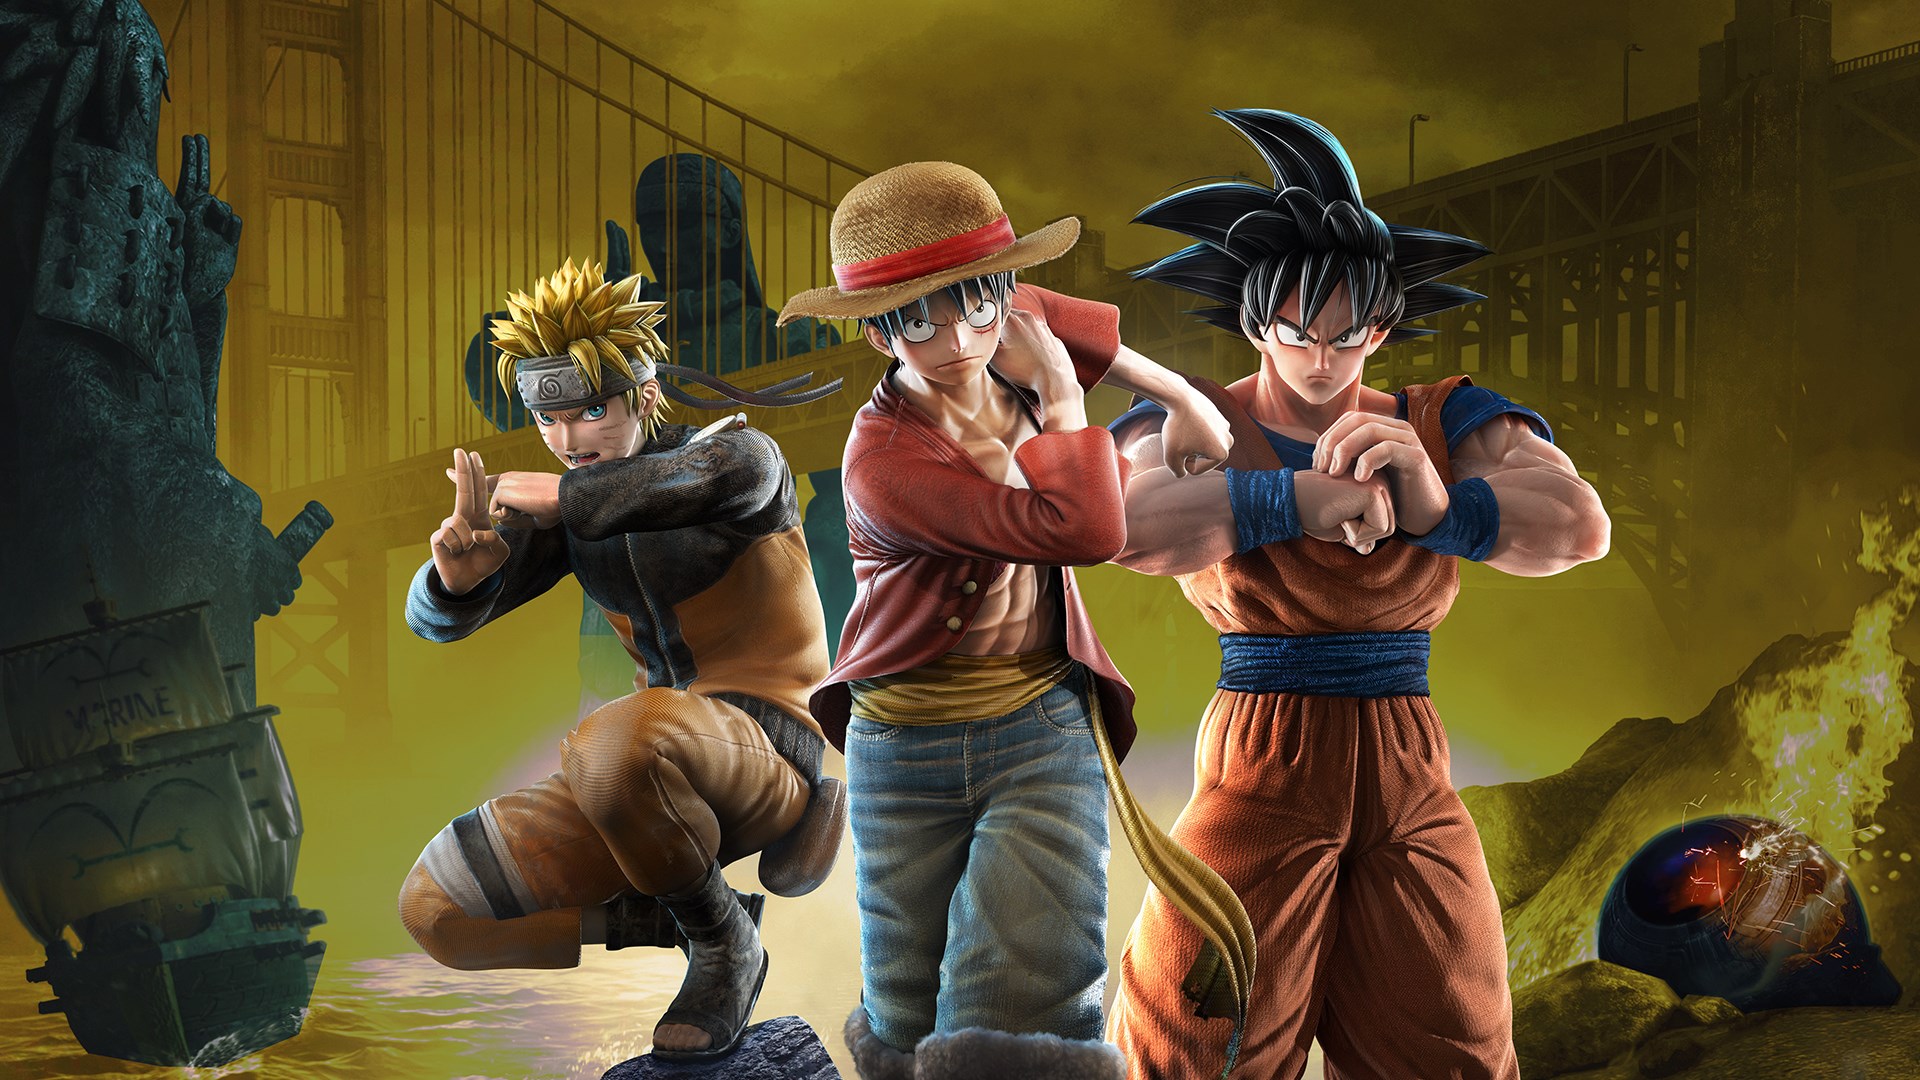 xbox store jump force